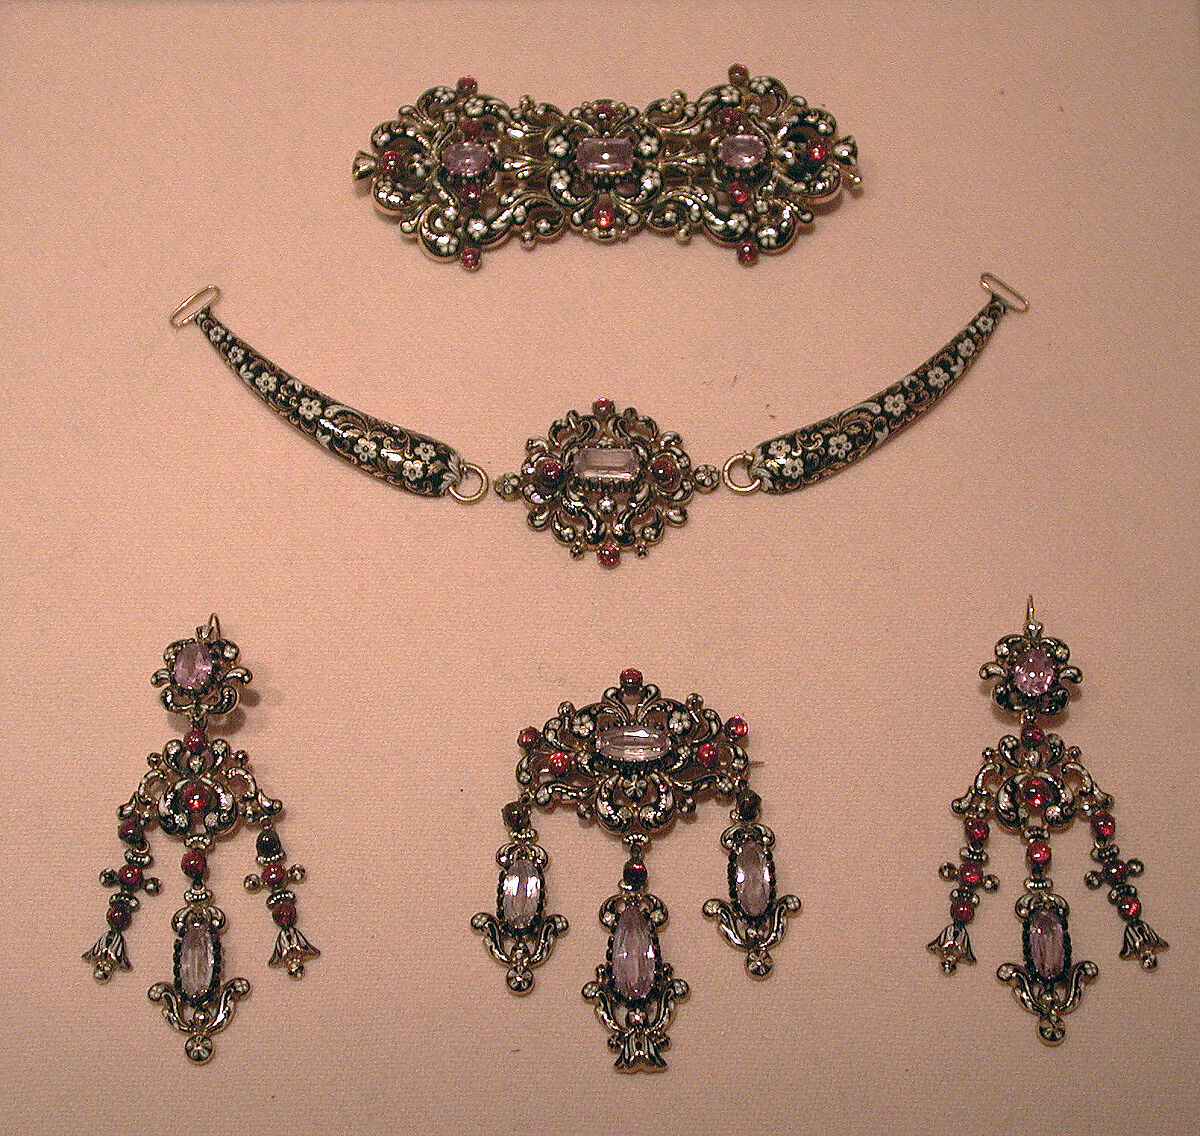 Parure, Gold, enamel, and glass paste, probably Swiss 